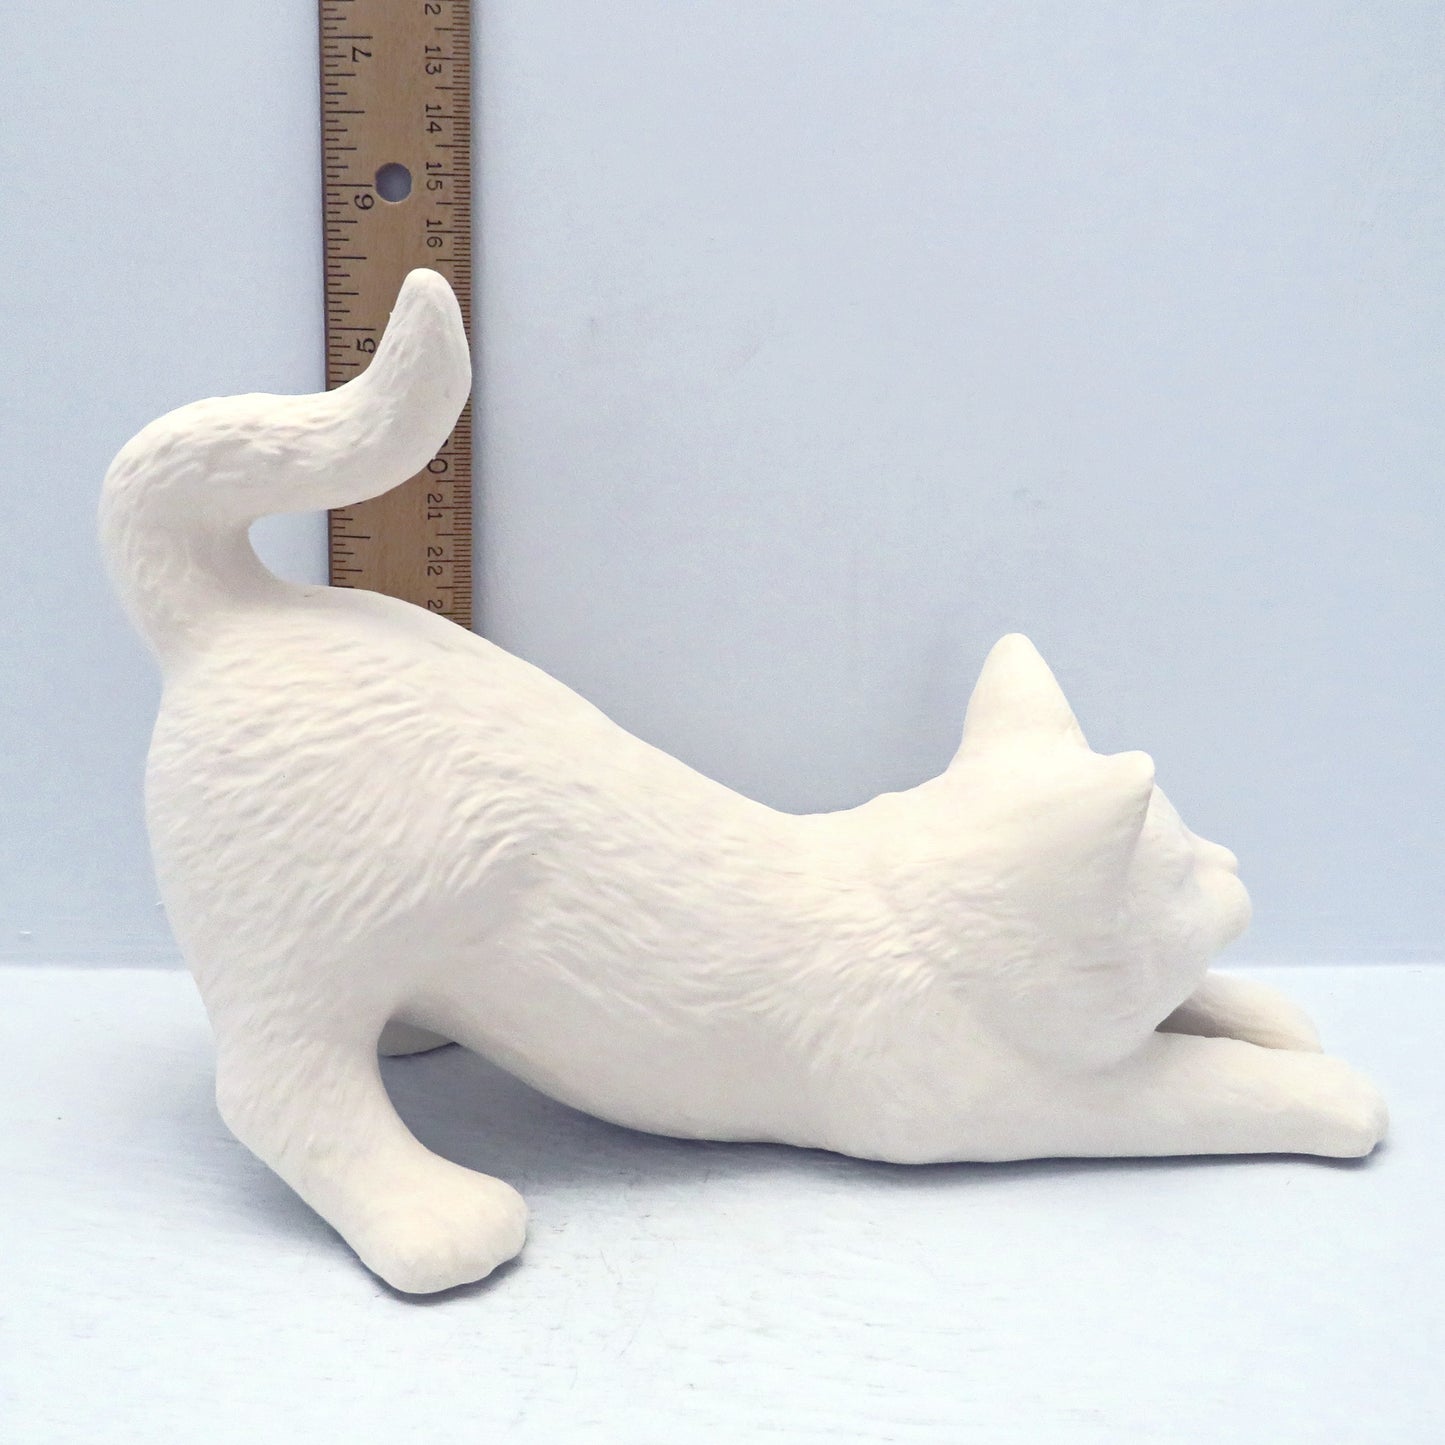 Paintable ceramic cat near ruler showing that its tail is approximately 5 1/2 inches high.